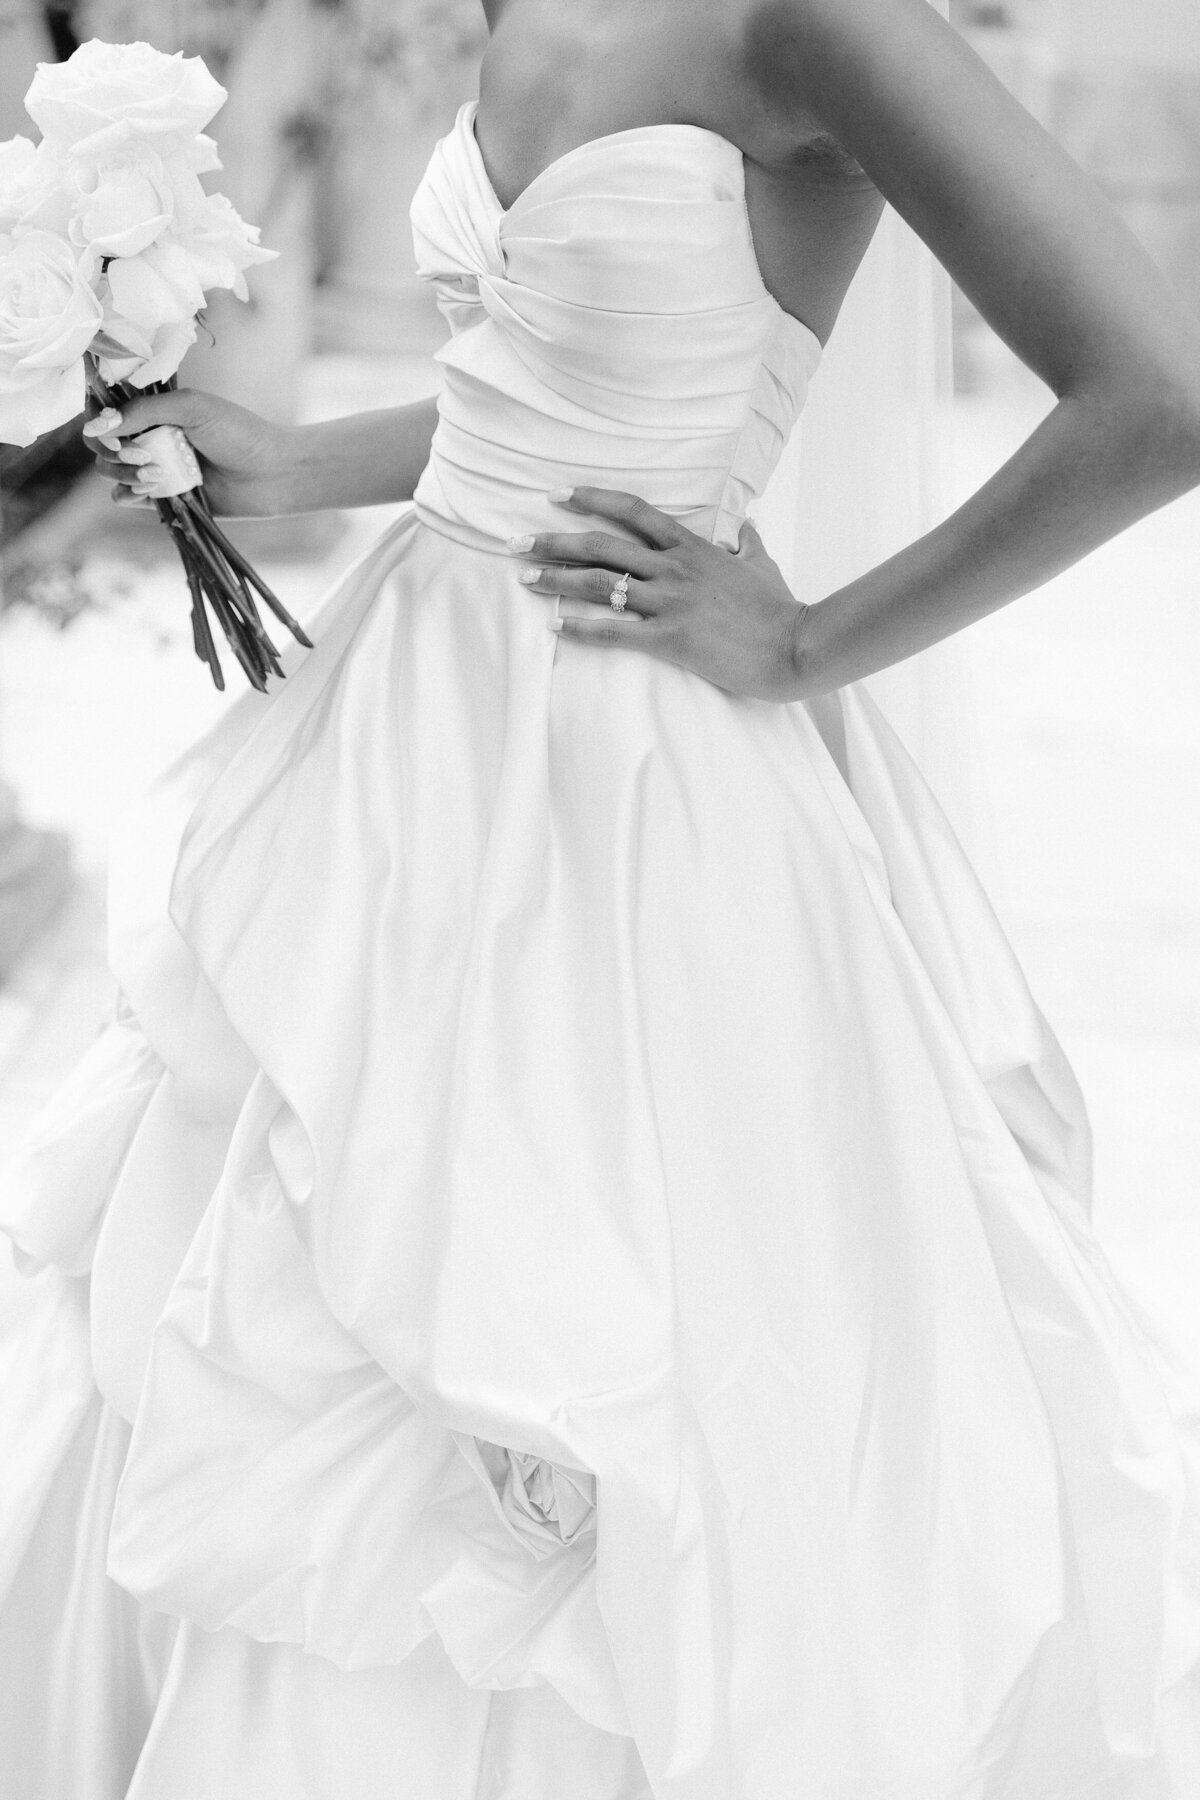 A bride wearing a monique lhuillier dress with her hand on hip